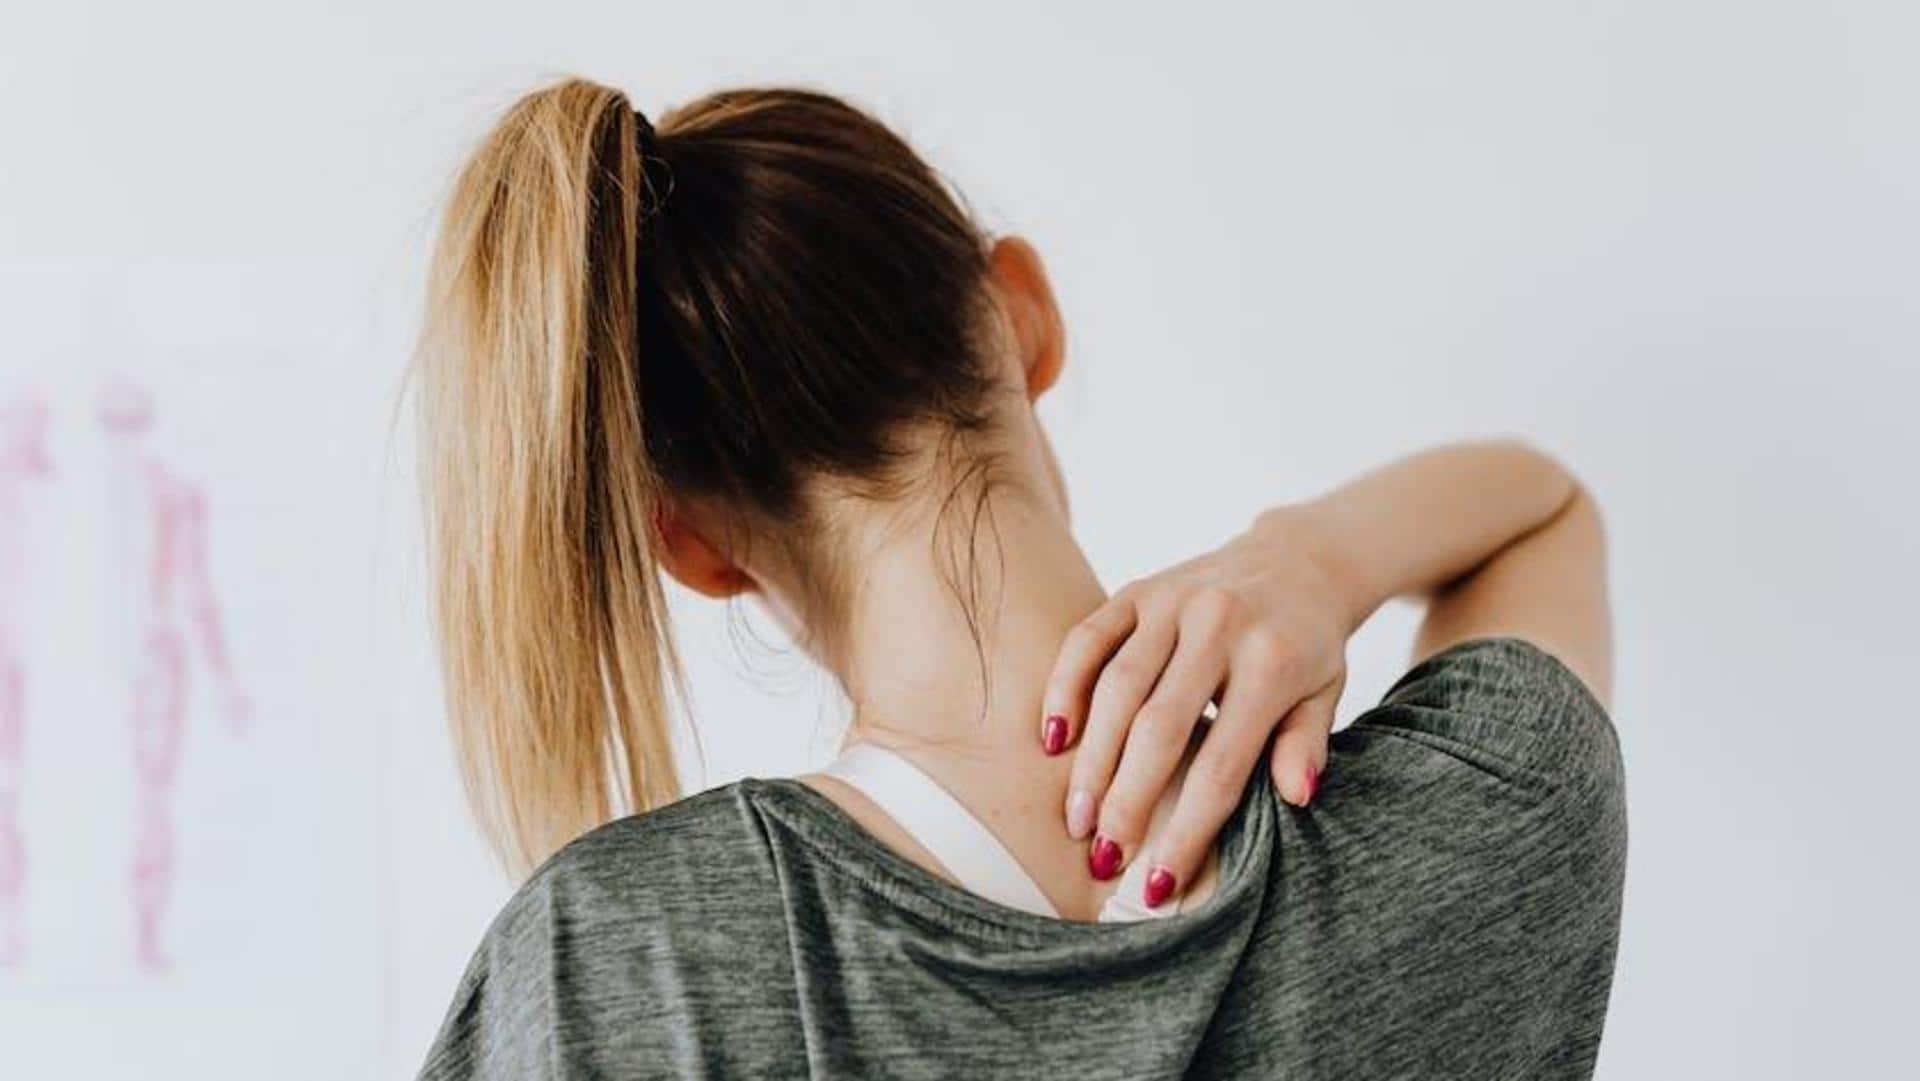 Try these natural home remedies for neck pain